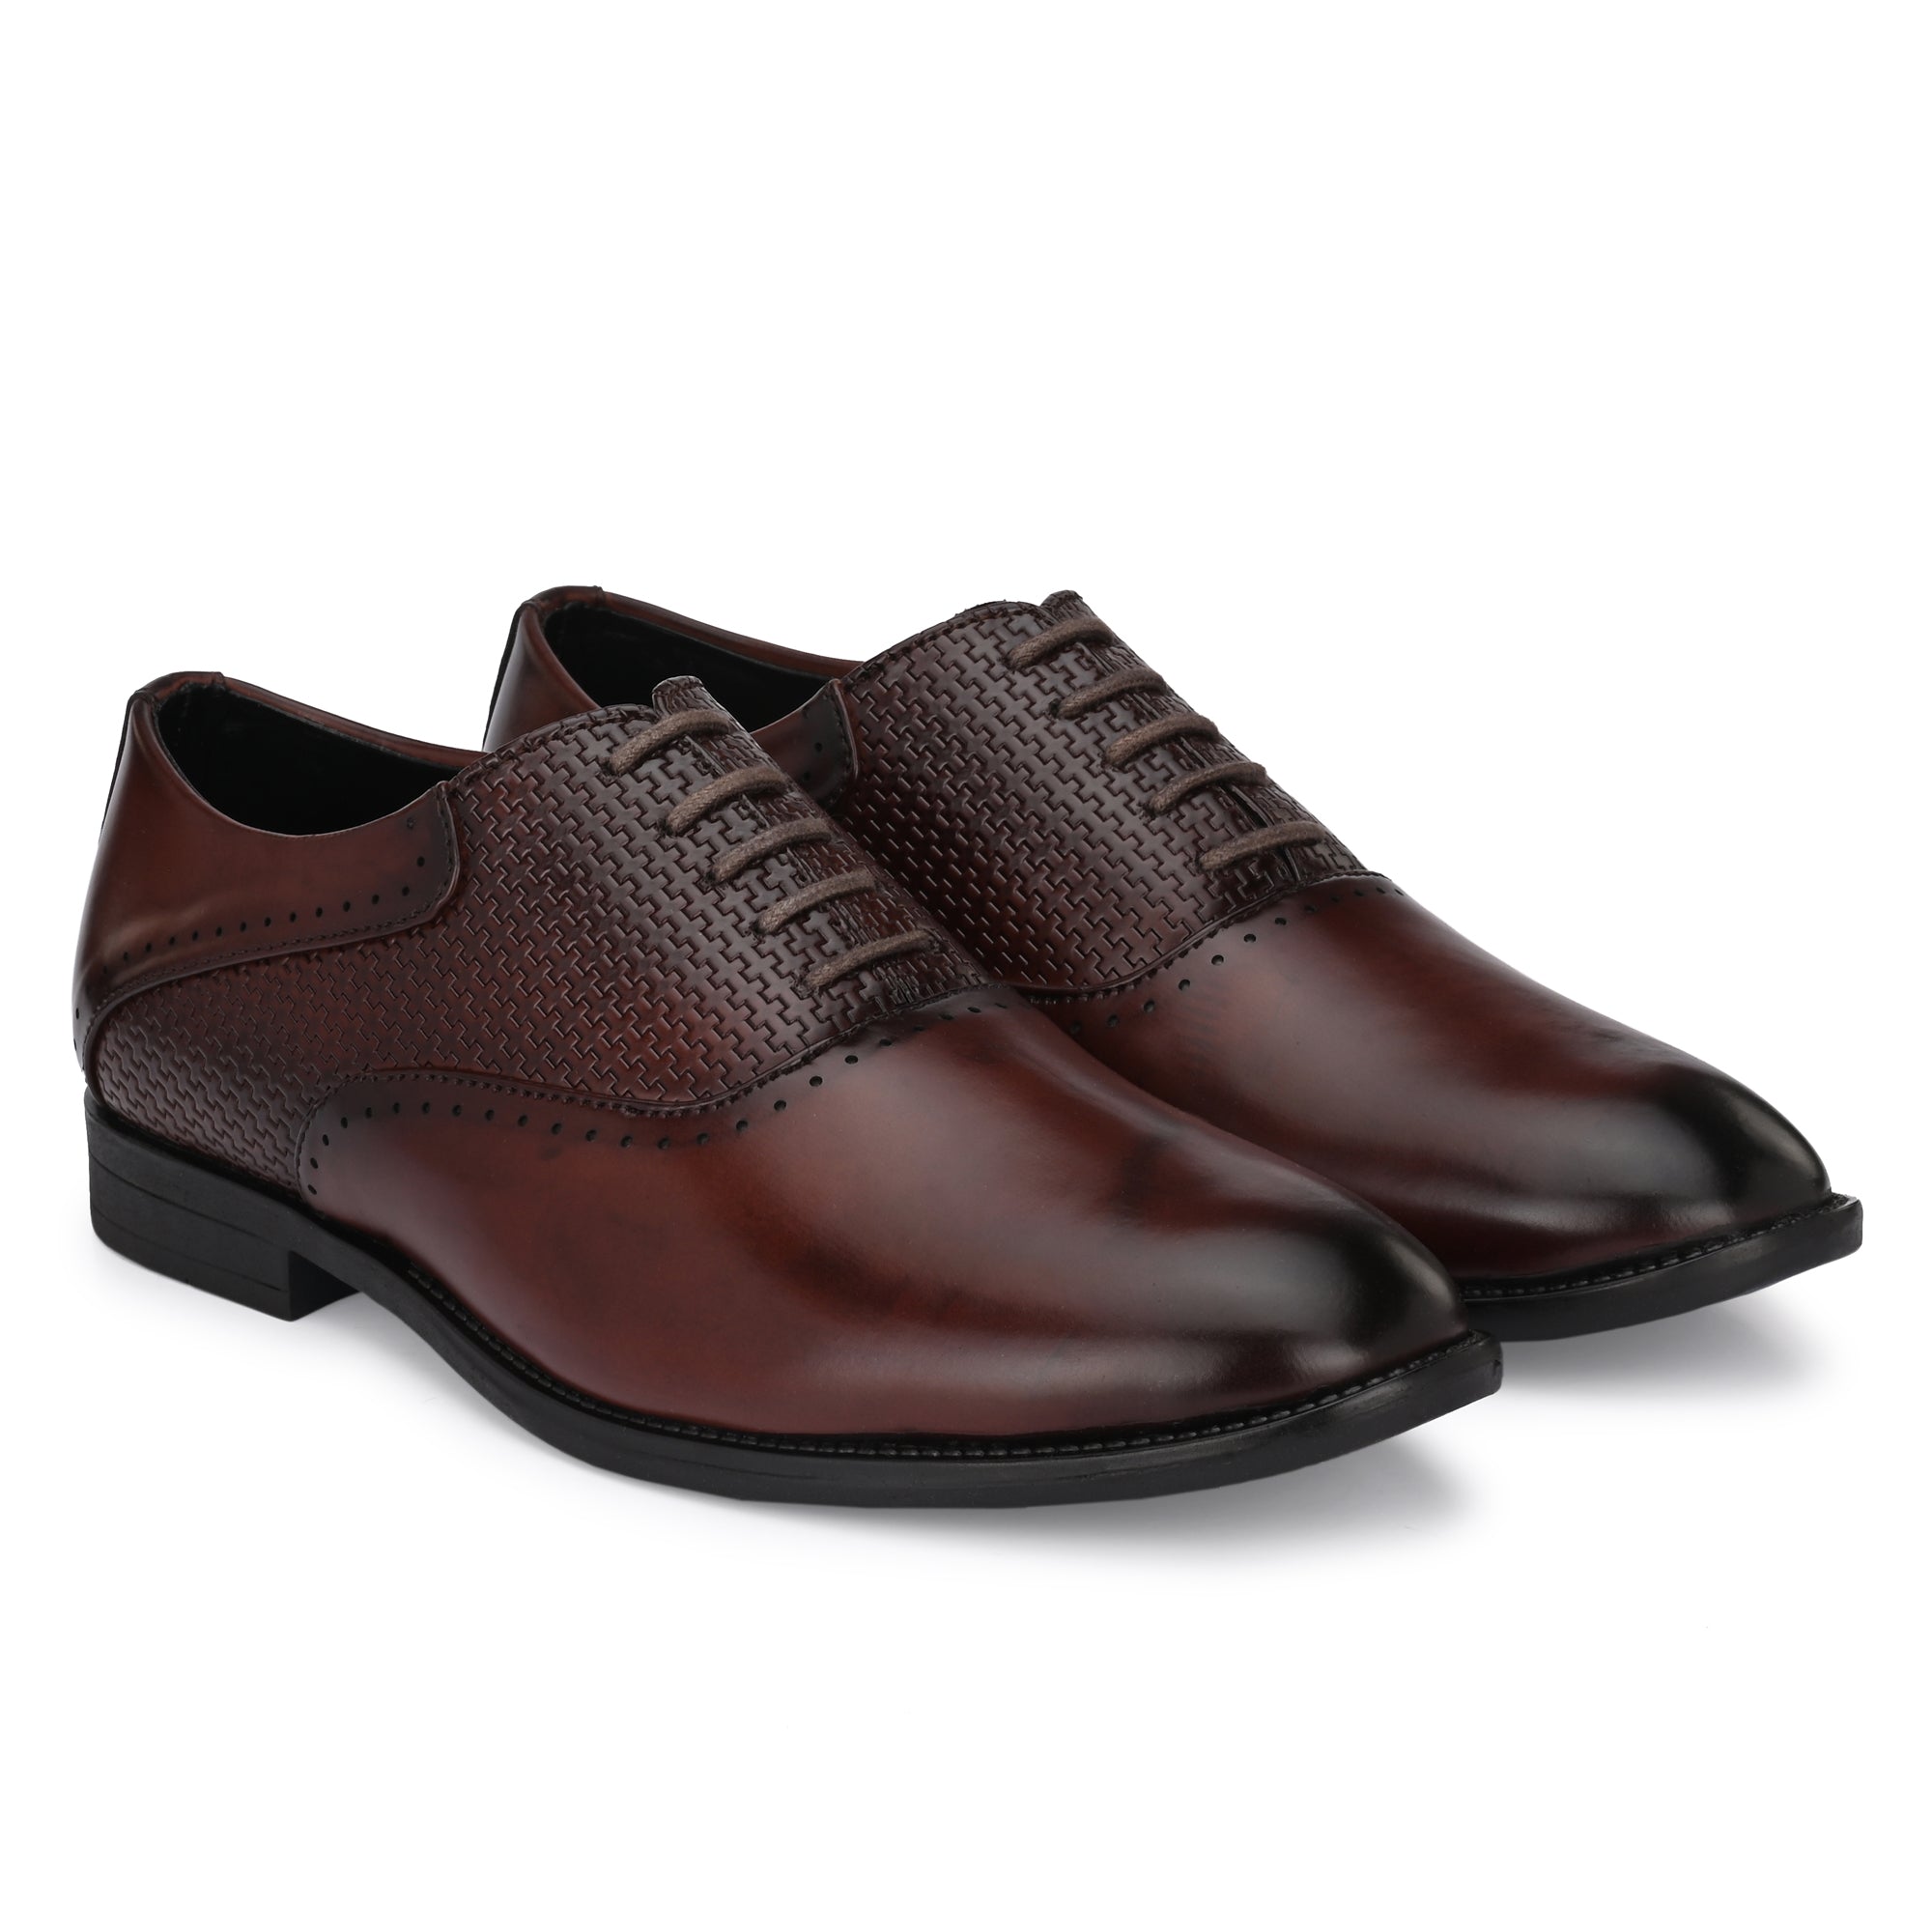 Kenneth Cole Shoes - Buy Kenneth Cole Shoes For Men & Women Online | Myntra